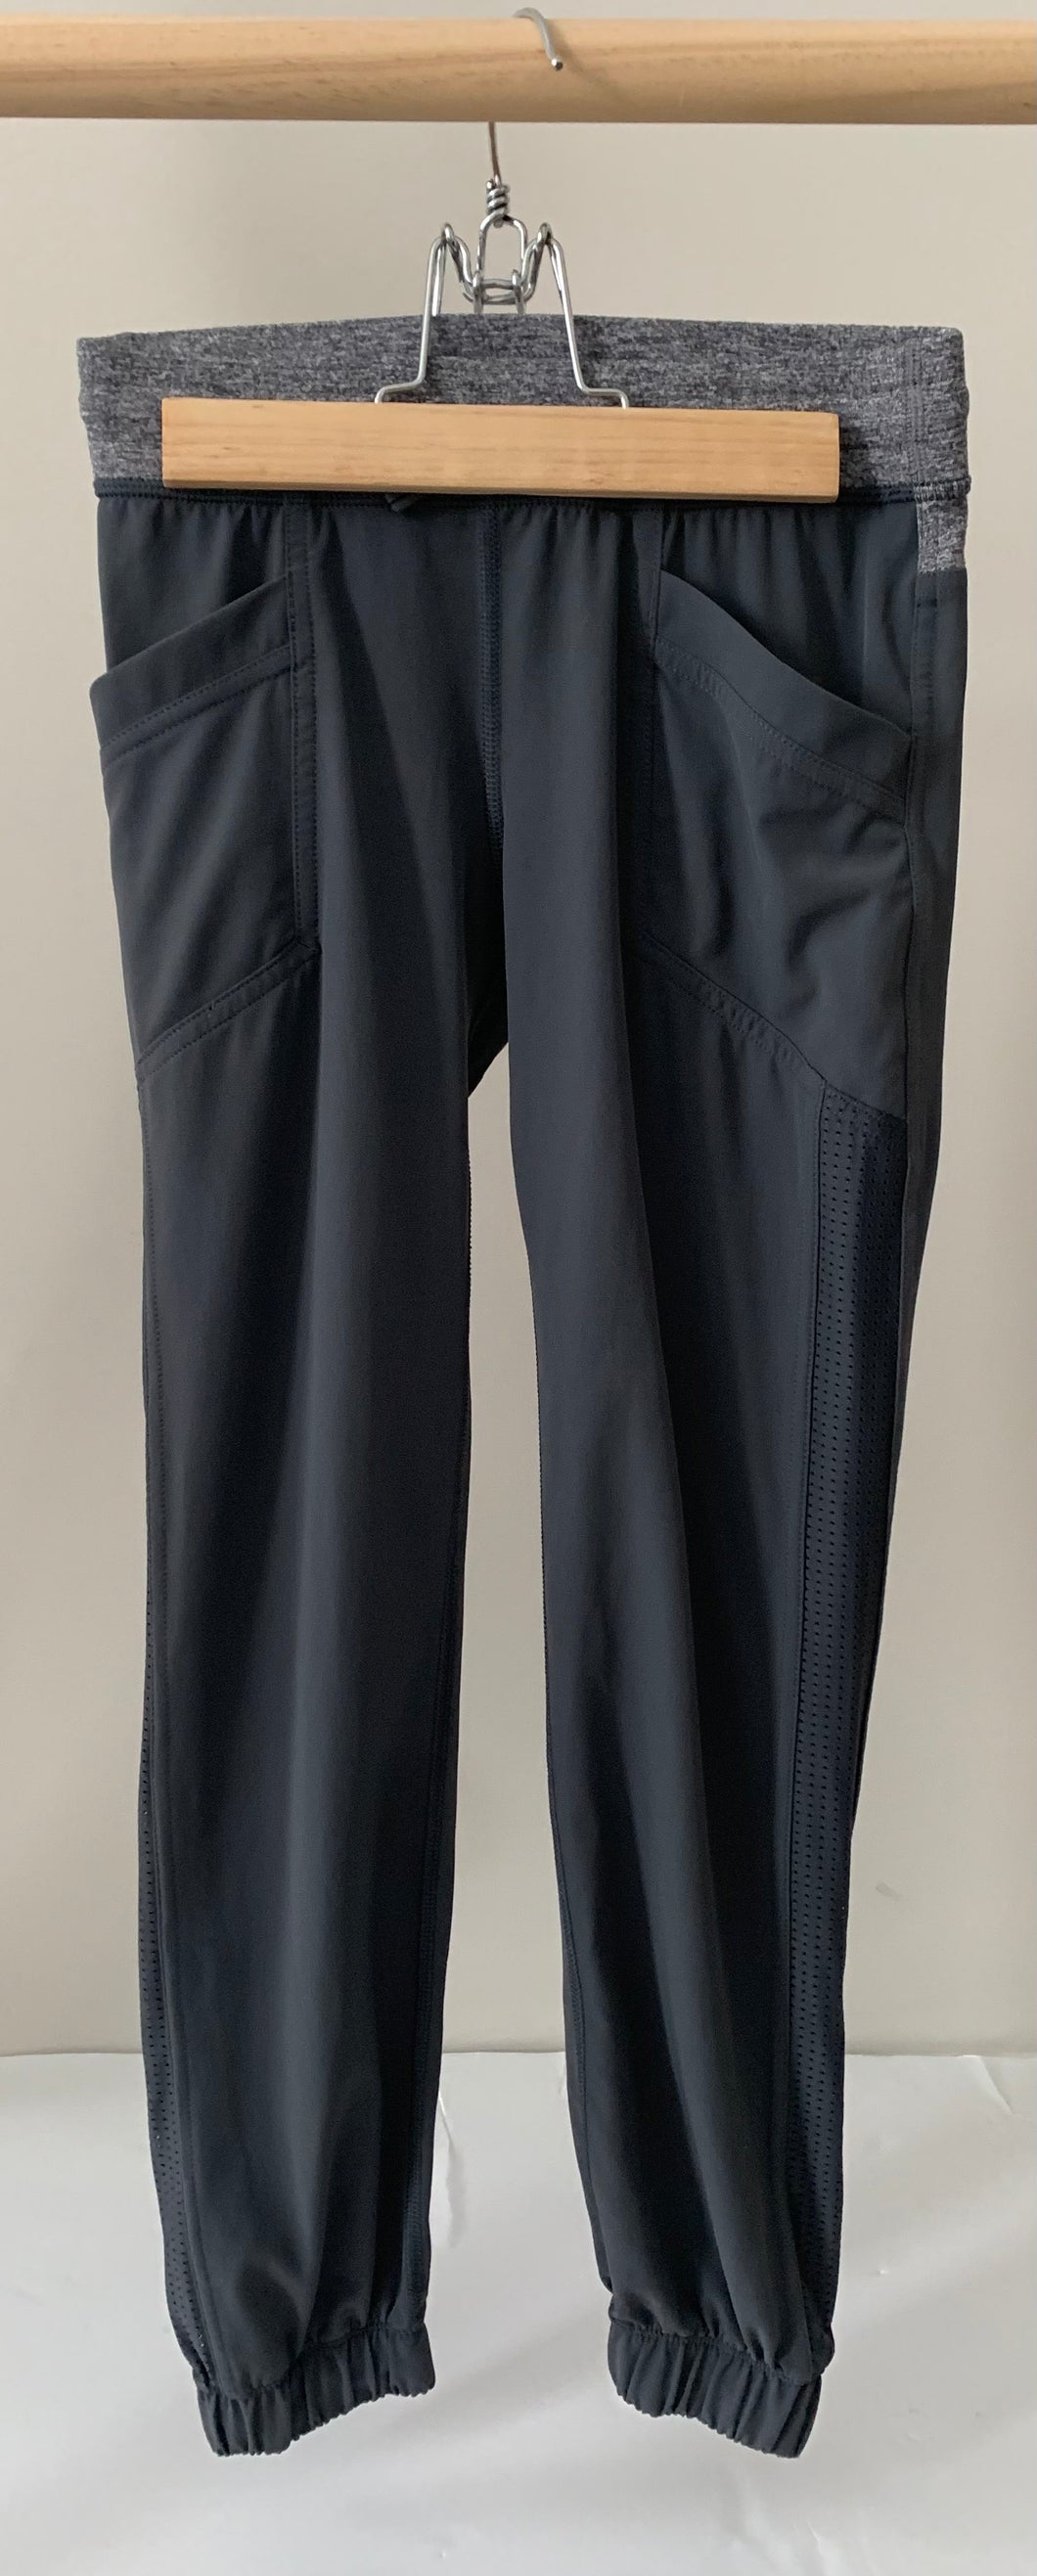 Ivivva Athletic Pant Size 8